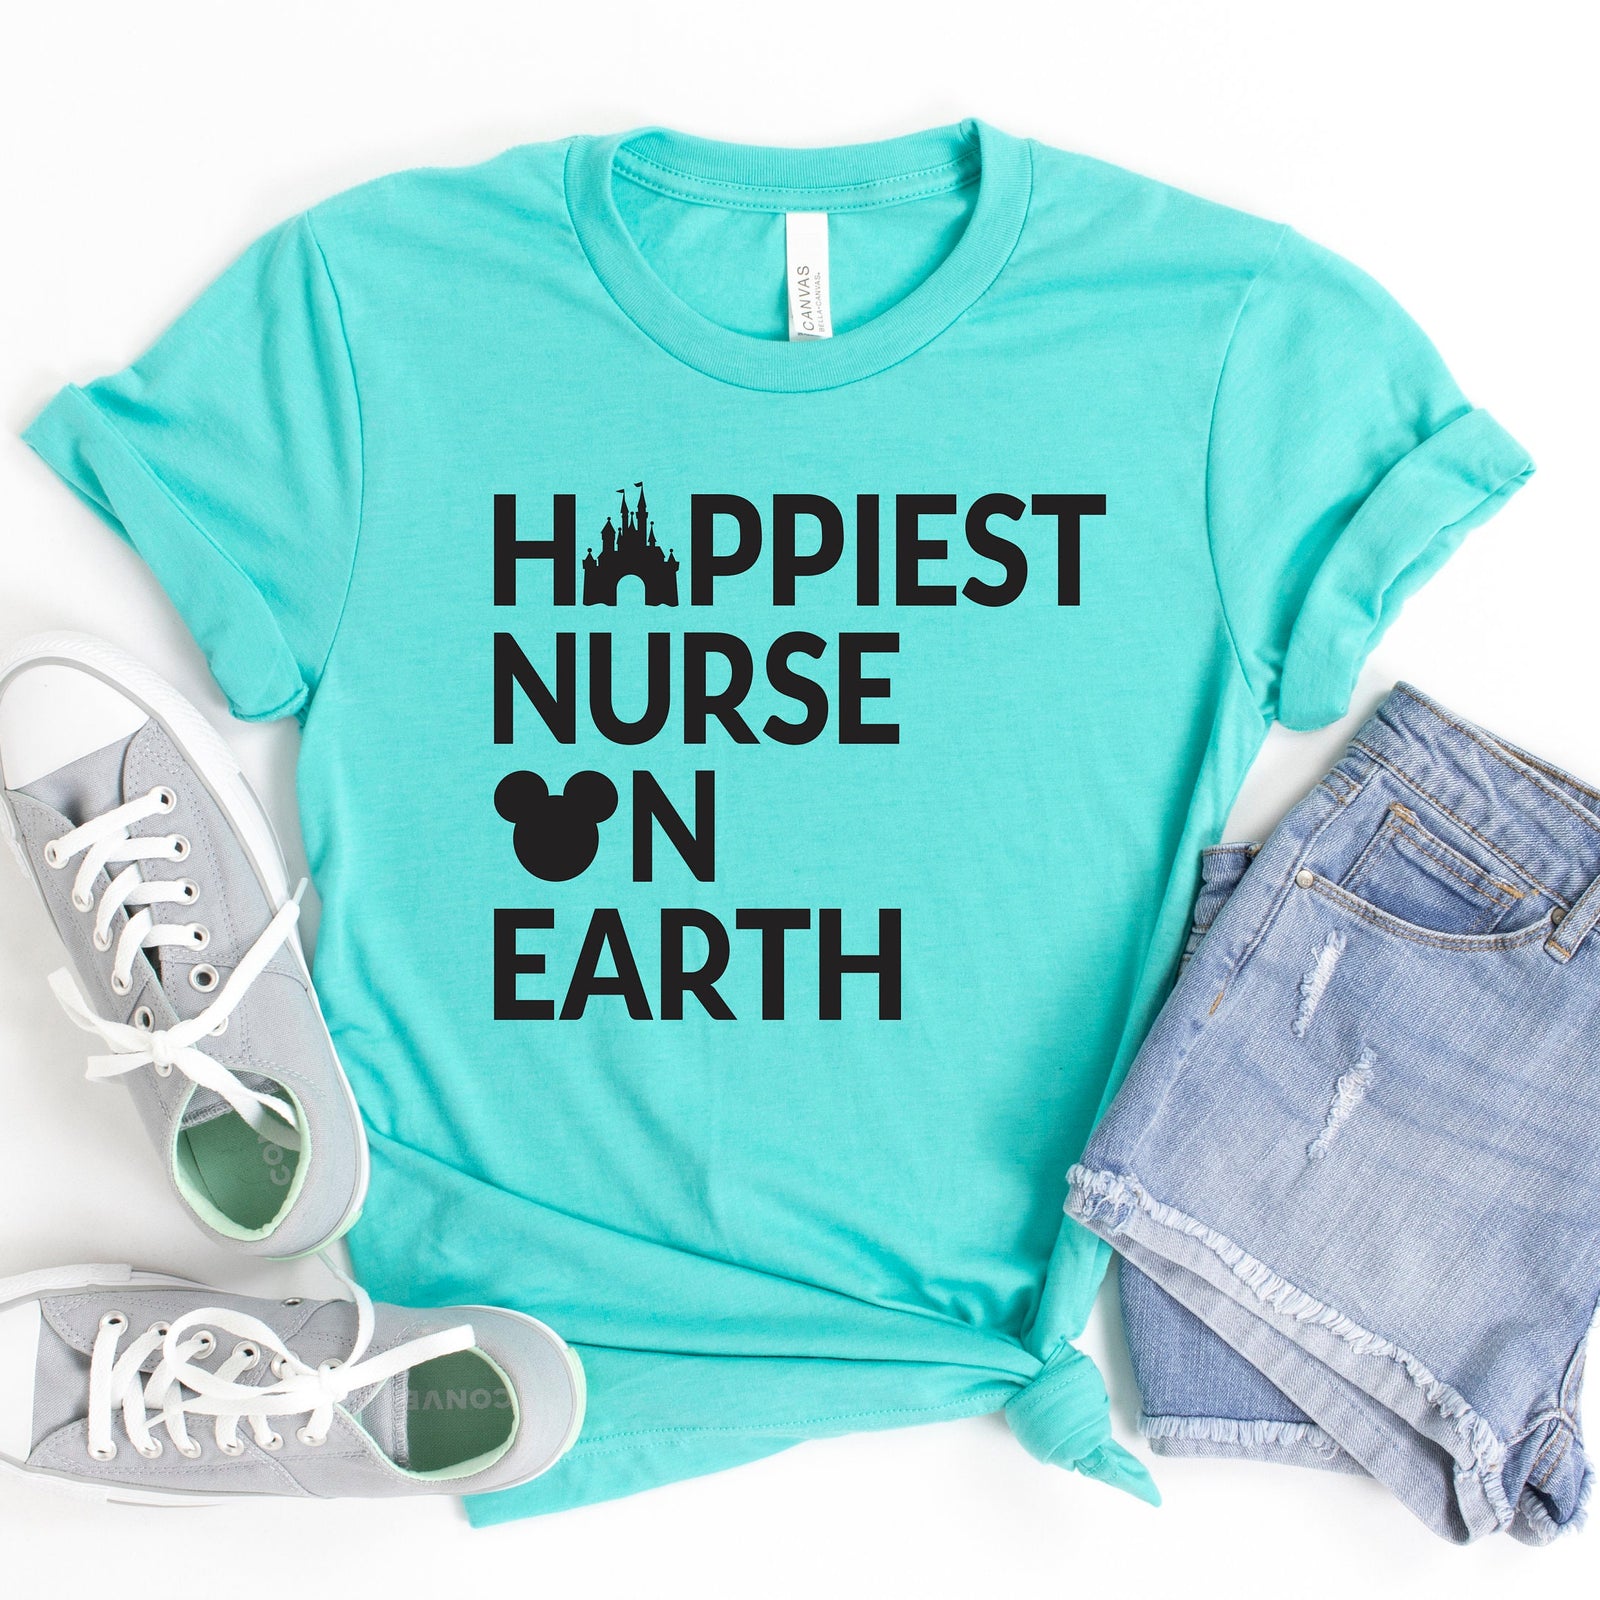 Happiest Nurse on Earth Disney T Shirt- Health Care Worker Gift - Mickey Mouse Castle